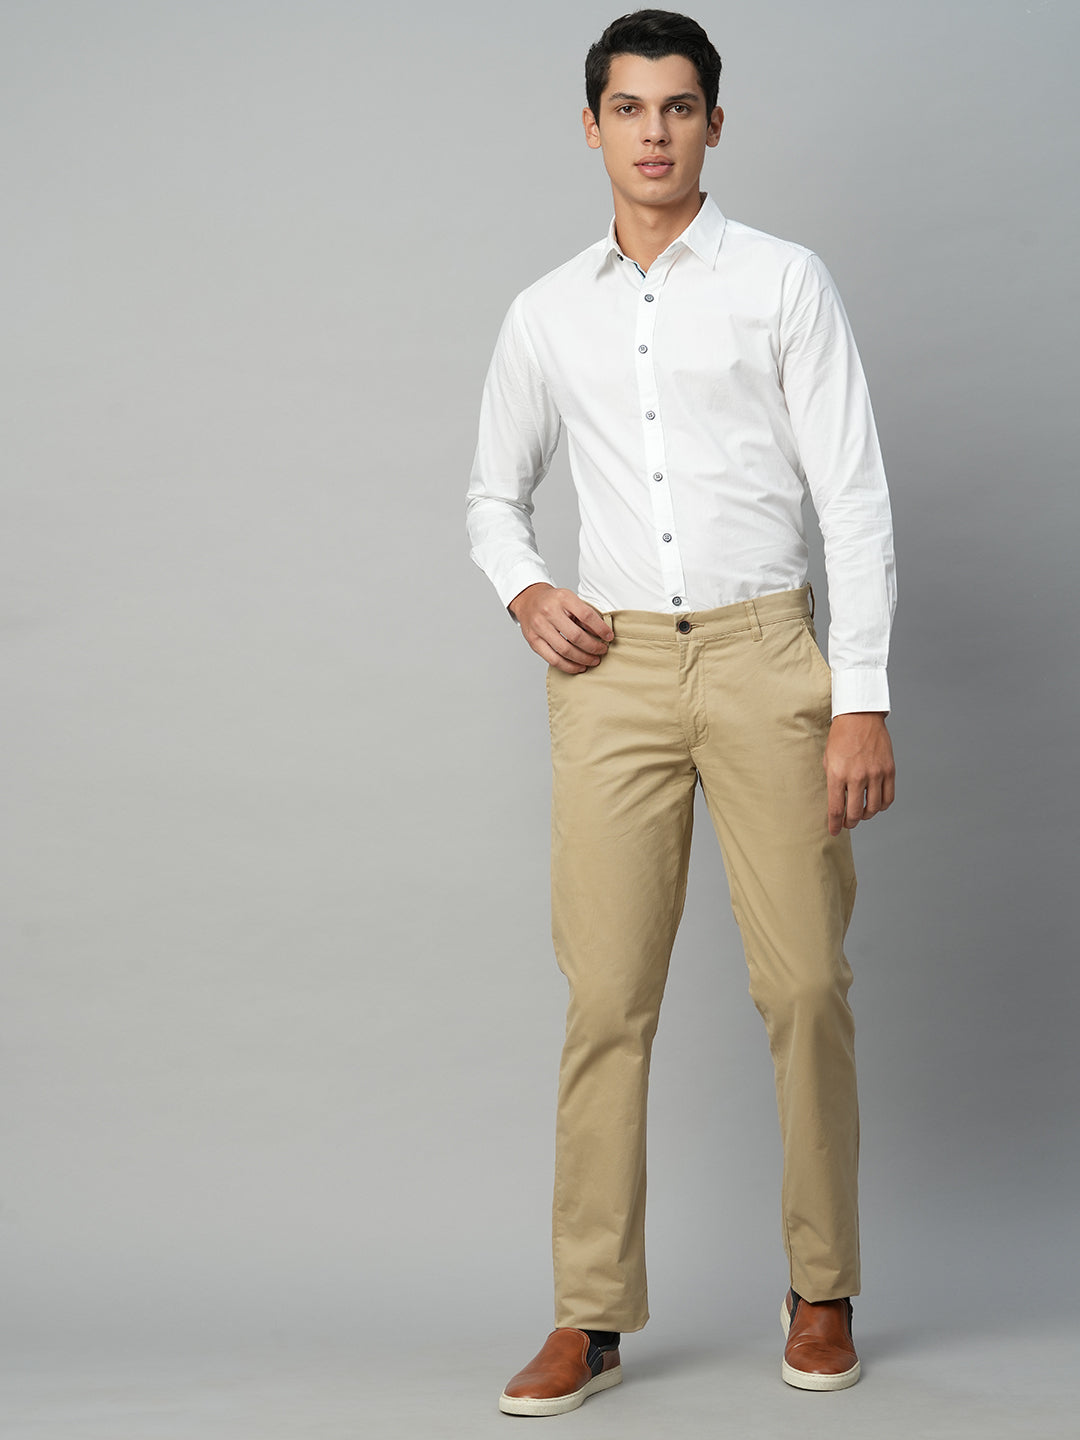 A Young Attractive Fellow in a White Shirt and Beige Pants Looks in the  Distance on a Light Blurred Background Stock Image  Image of cheerful  arms 97962823